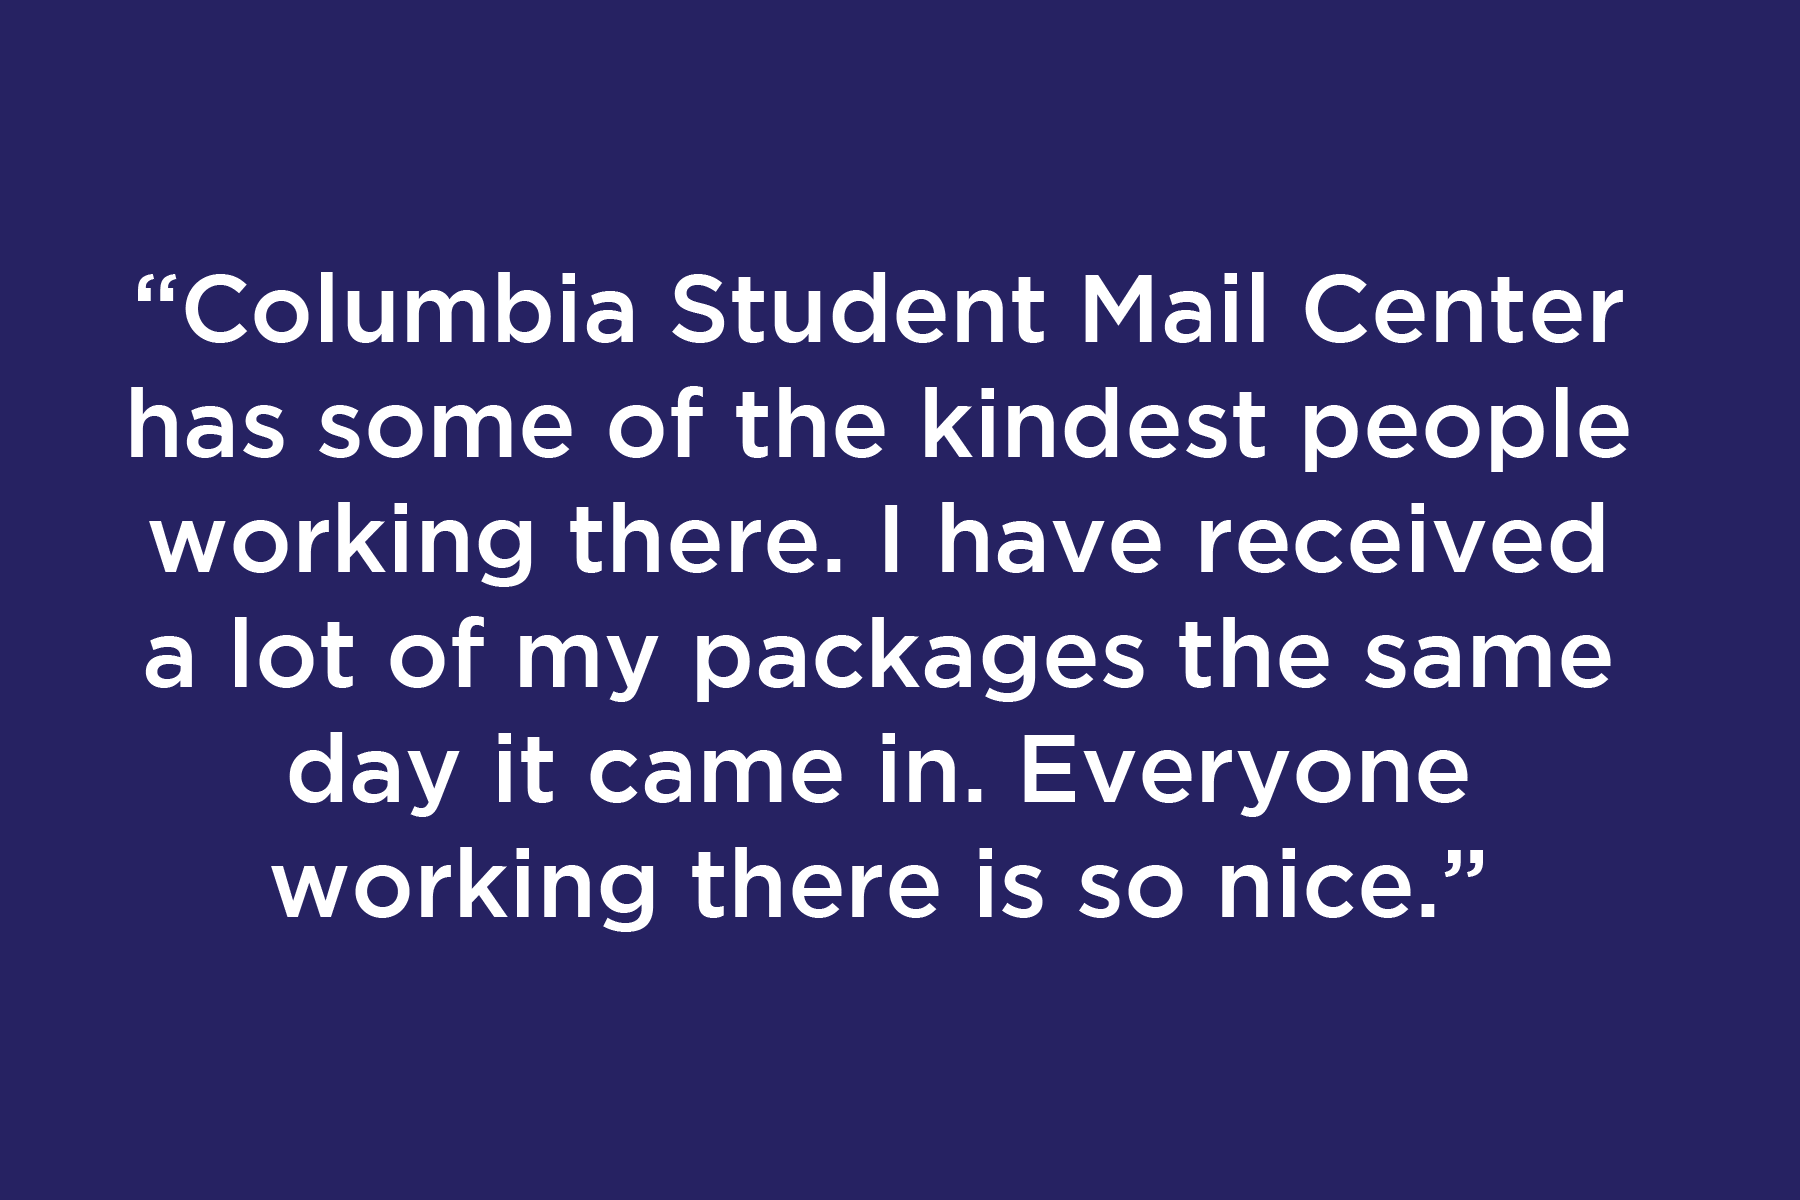 Columbia Student Mail Center has some of the kindest people working there. I have received a lot of my packages the same day it came in. Everyone working there is so nice.